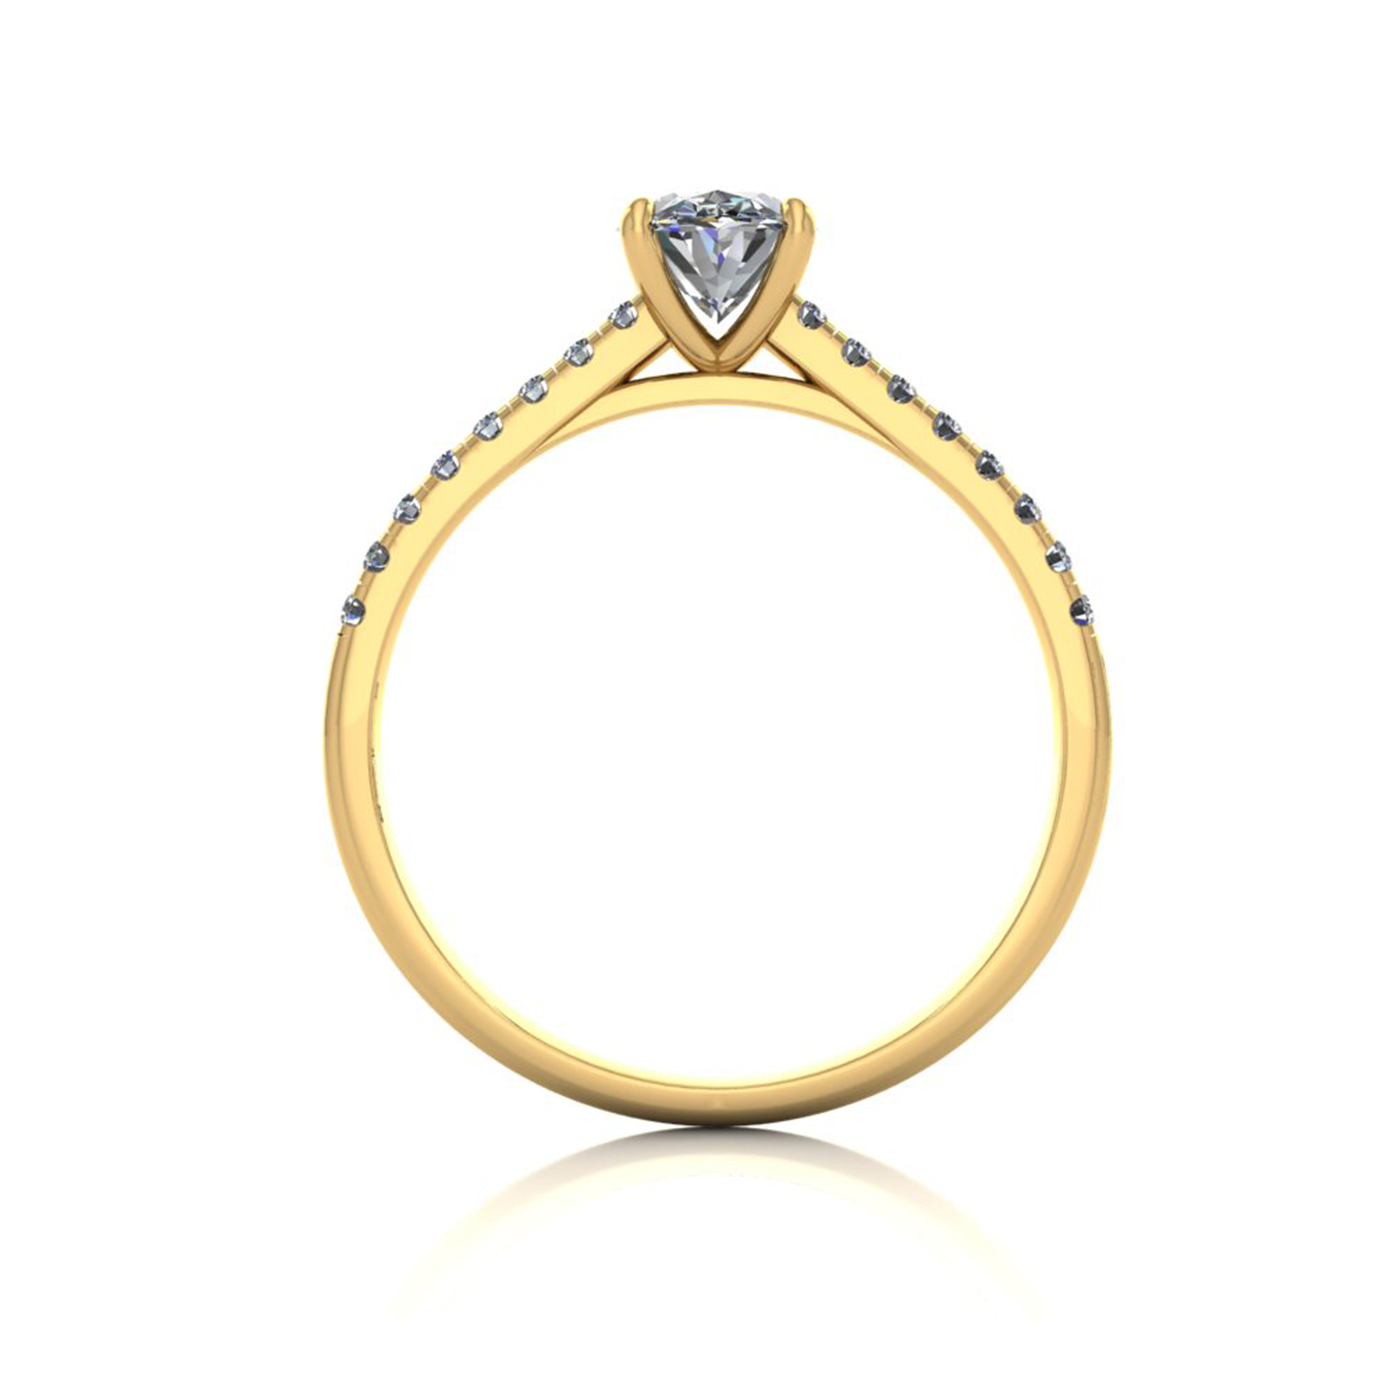 18k yellow gold  0,80 ct 4 prongs oval cut diamond engagement ring with whisper thin pavÉ set band